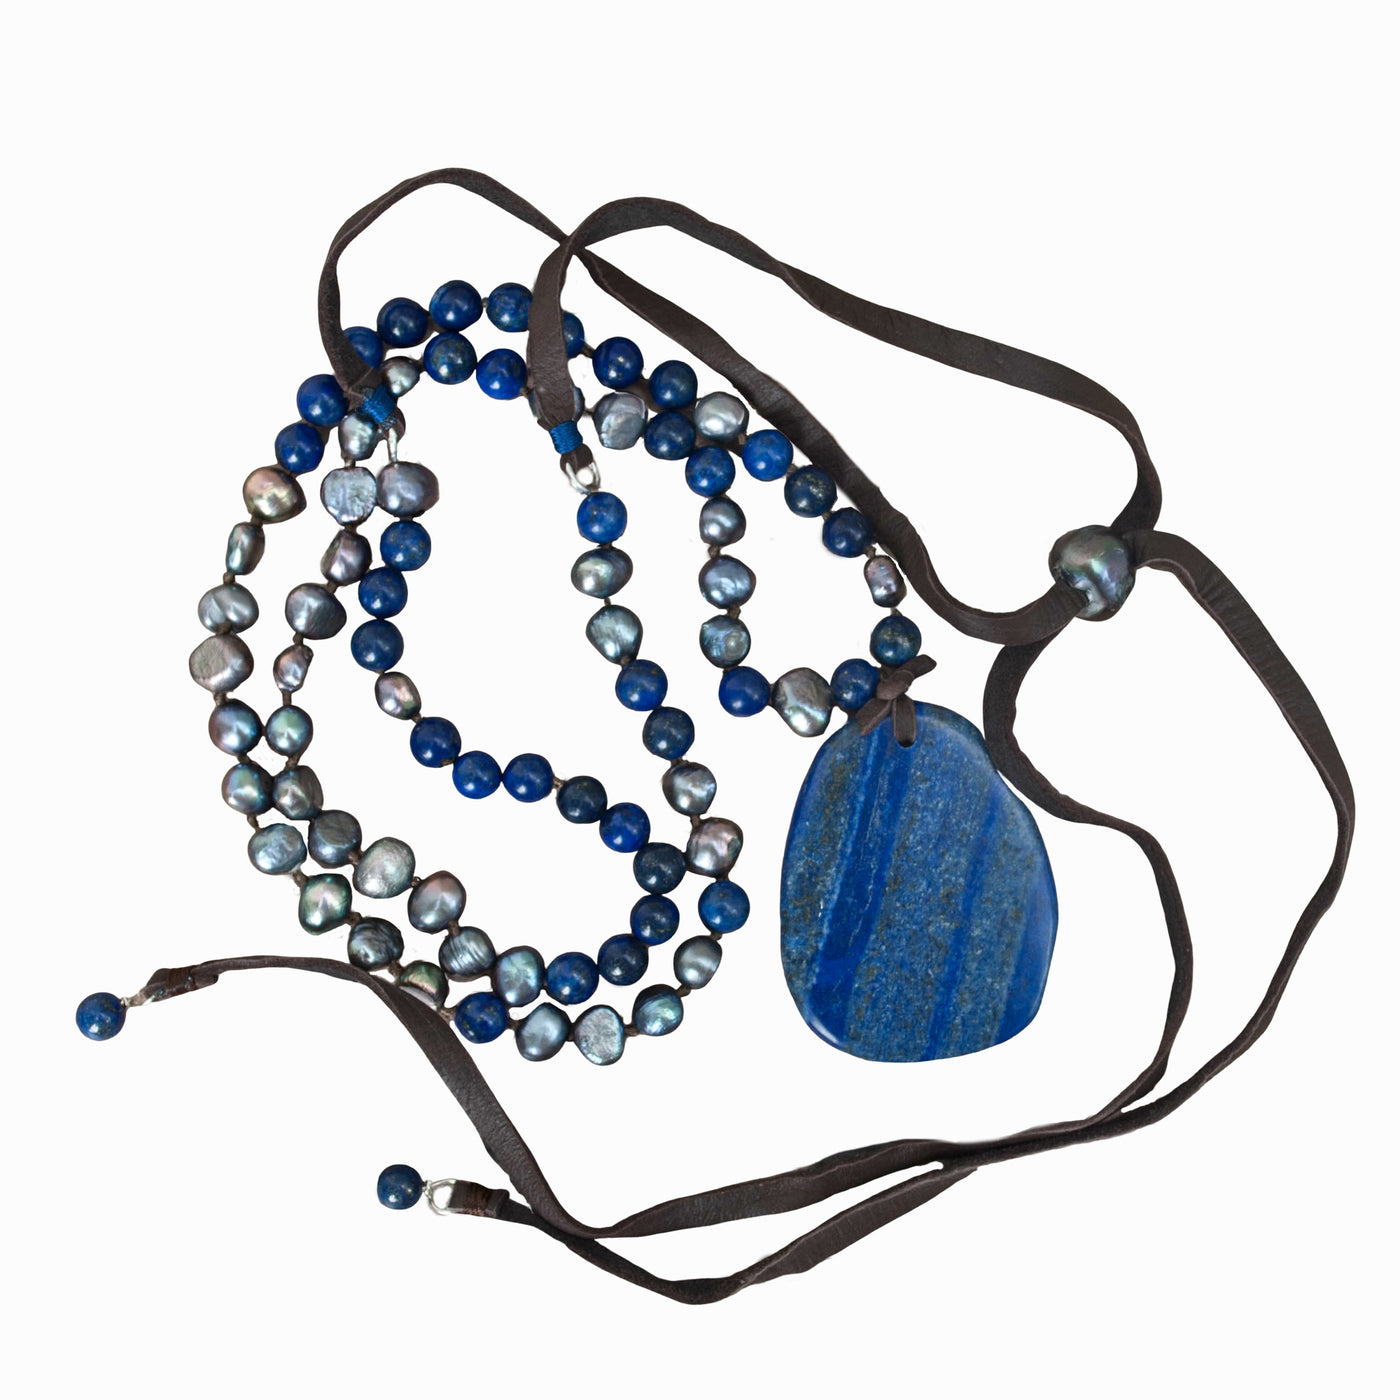 Necklace-artisan-crafted with lapis, grey freshwater pearls and genuine leather. Adjustable length. 